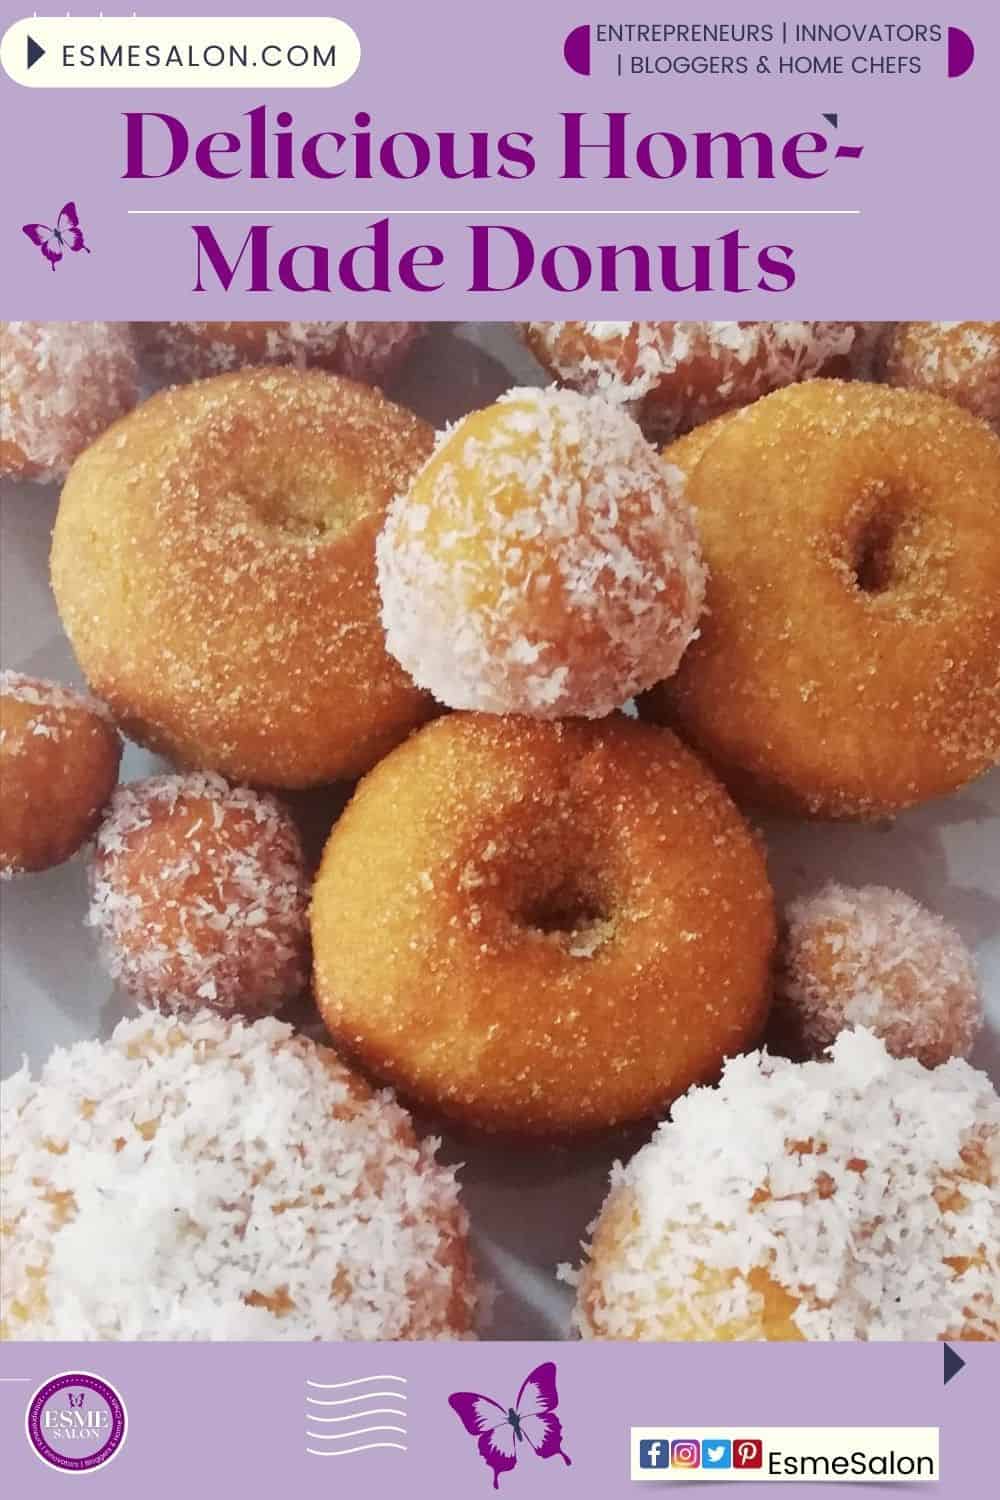 An image with numerous Delicious Home-Made Donuts rings and buttons and some covered in coconut